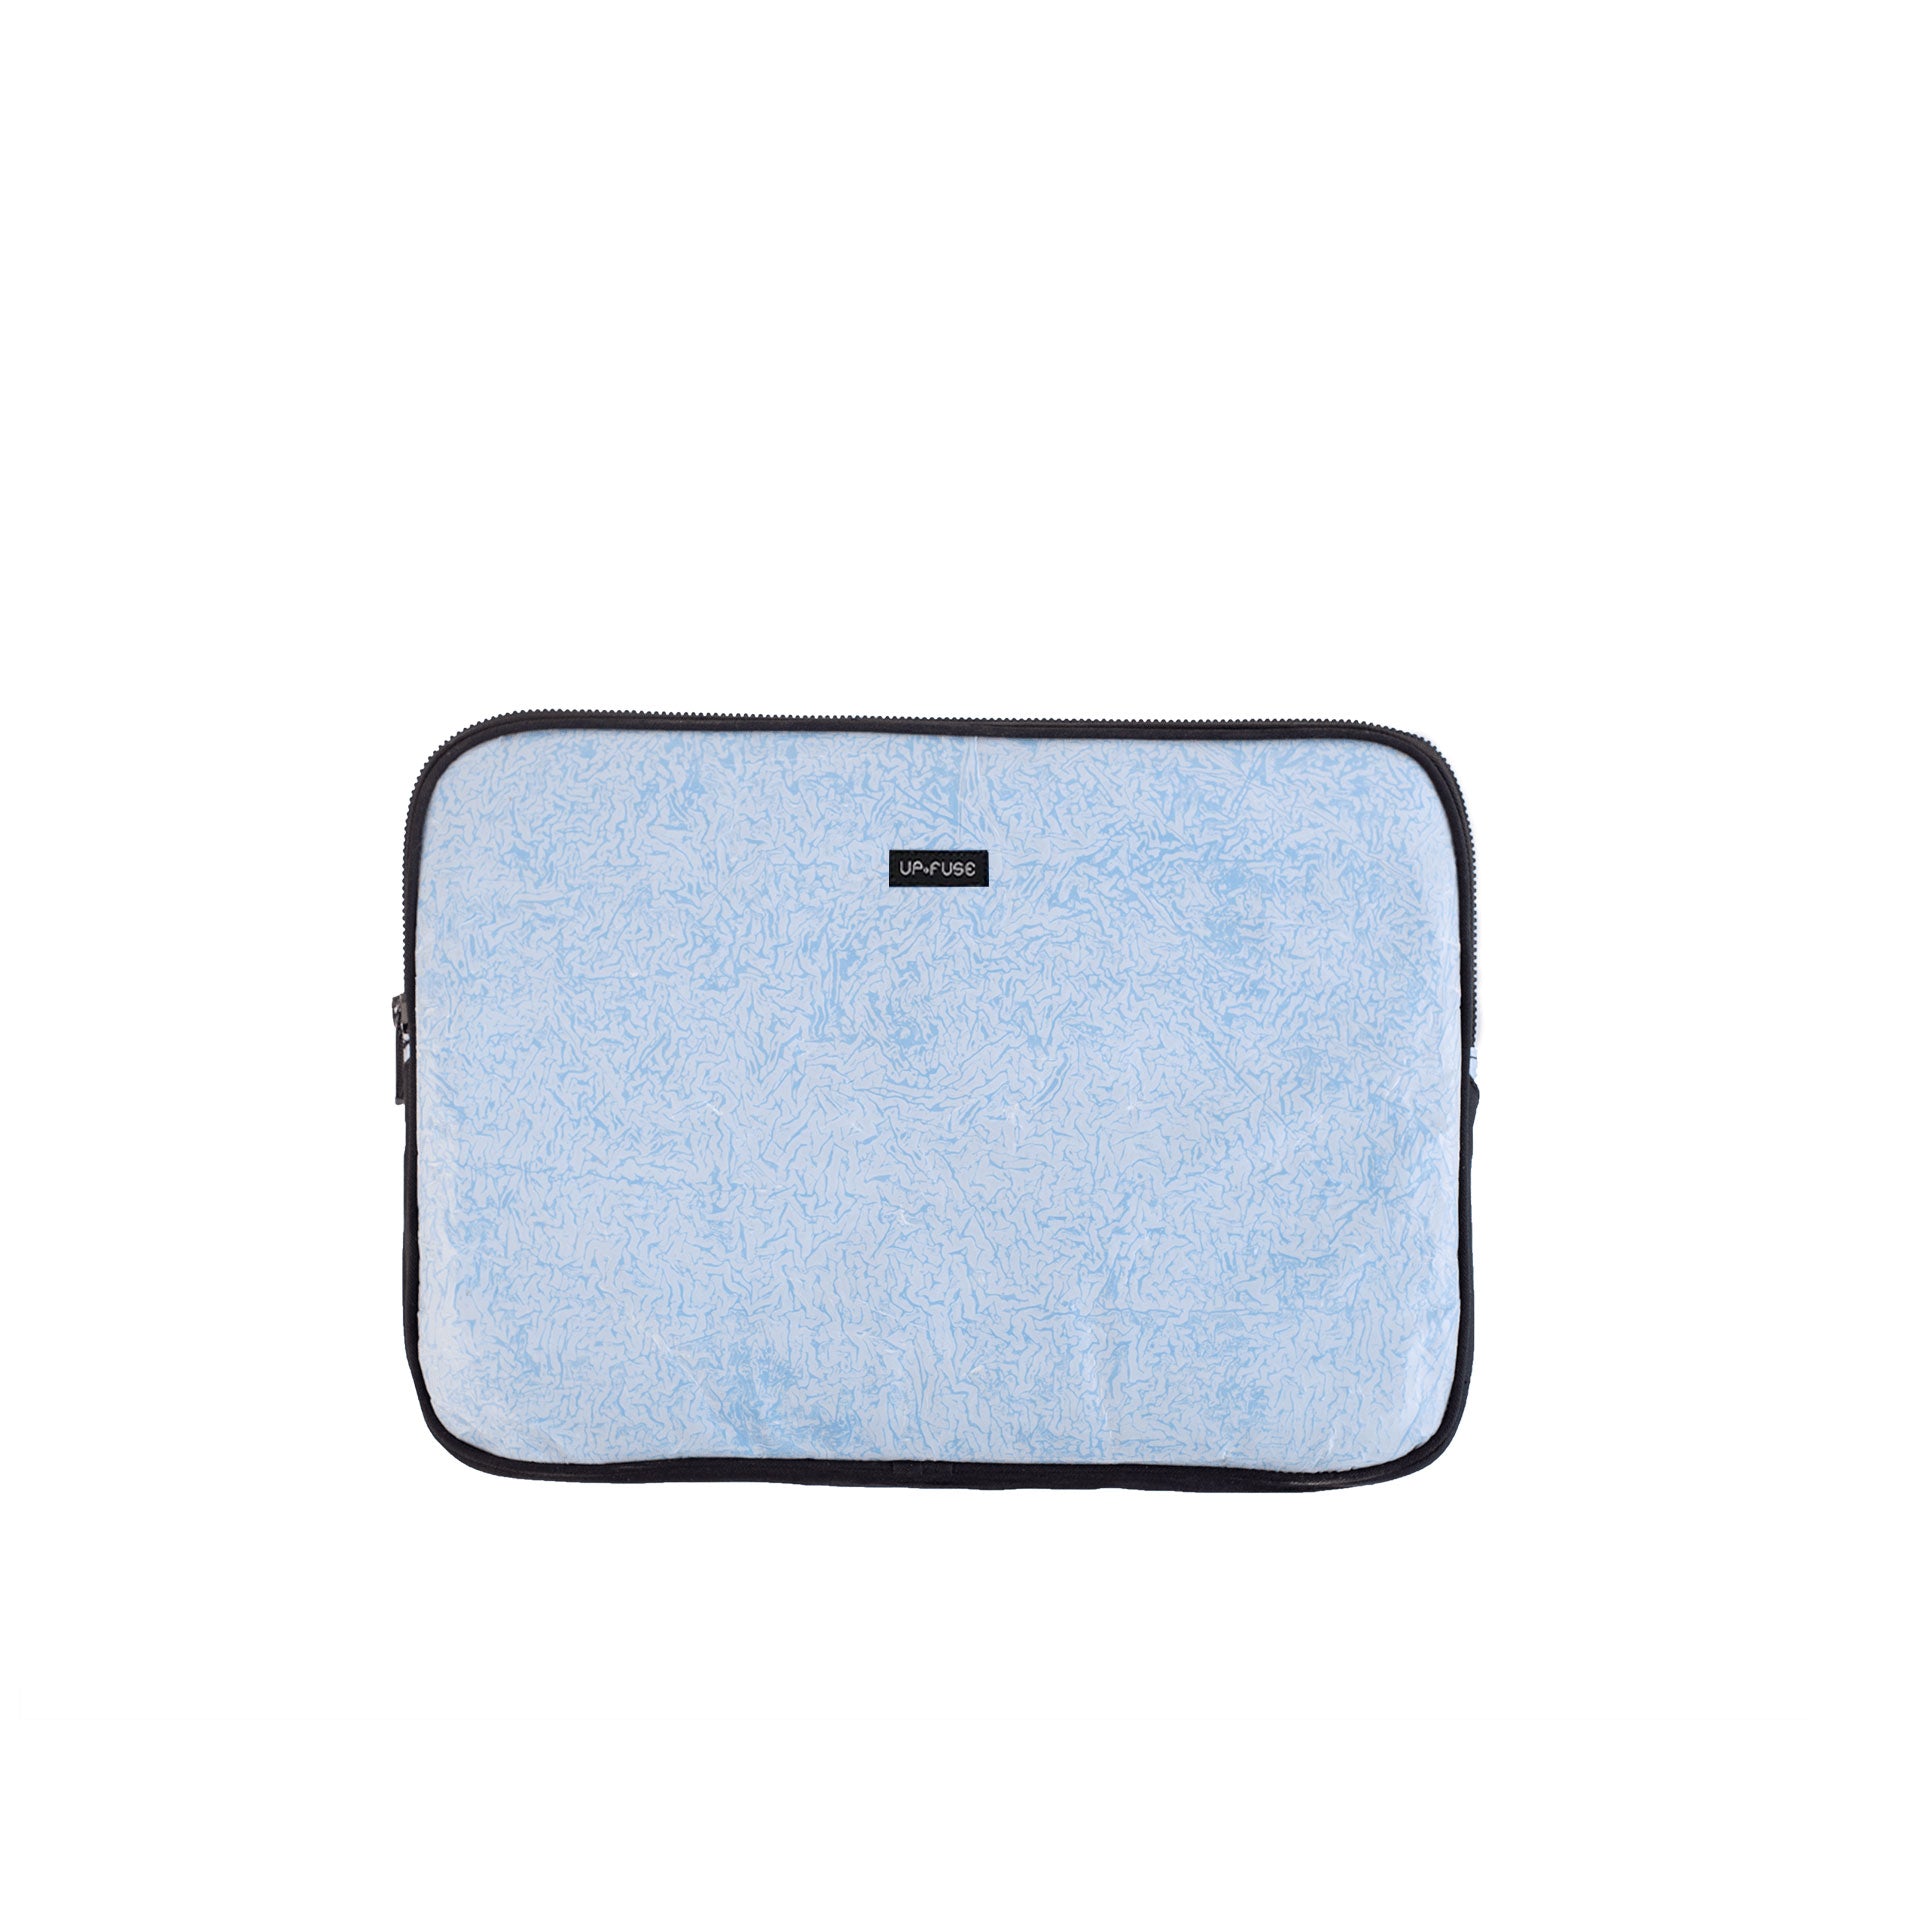 Classic Laptop Sleeve - Blue Whitie